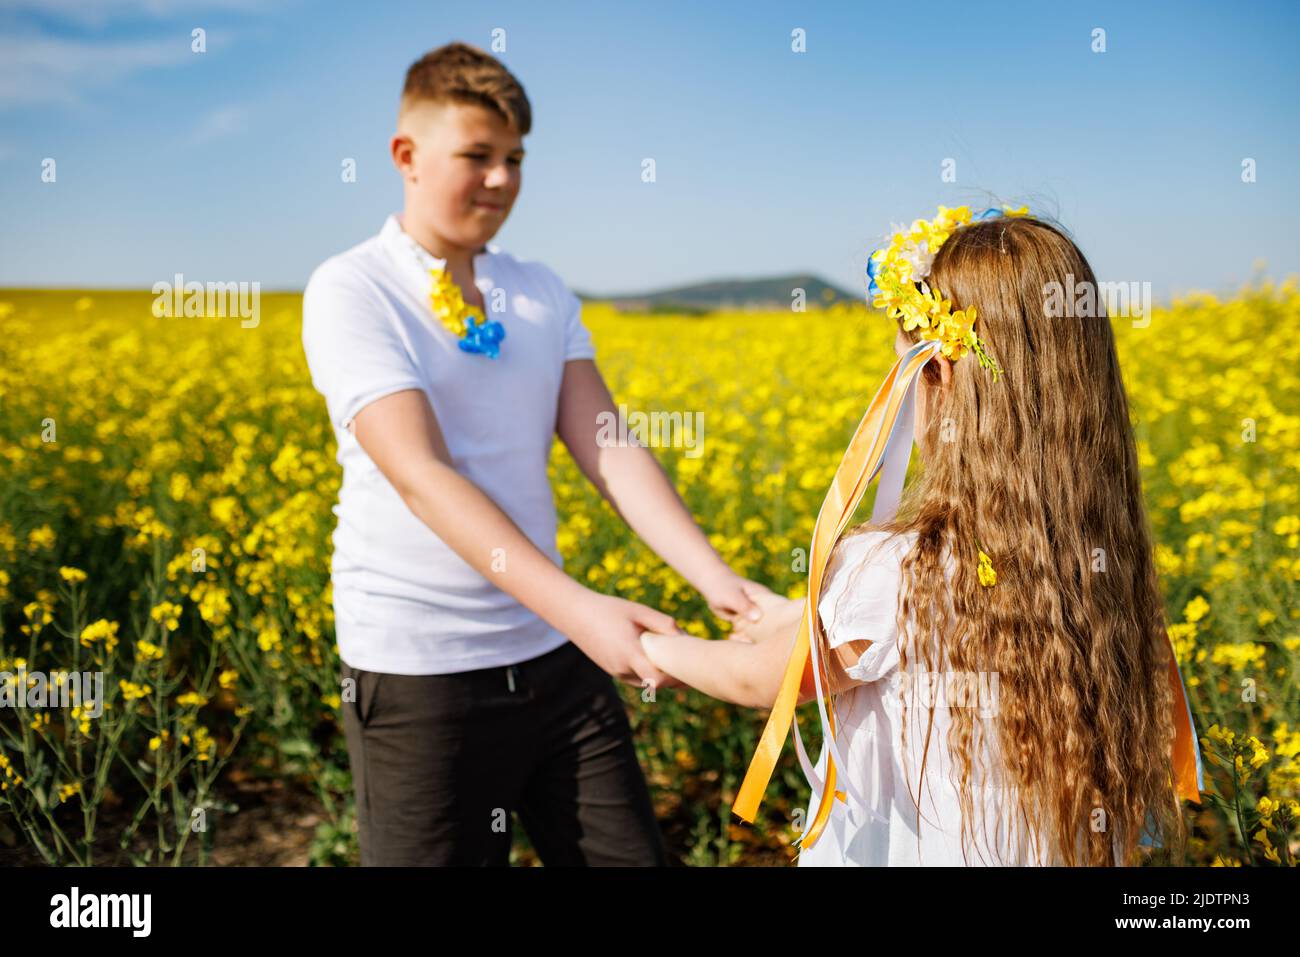 Teenagers: brother and sister with Ukrainian wreath with on head, in rapeseed field under blue sky Stock Photo